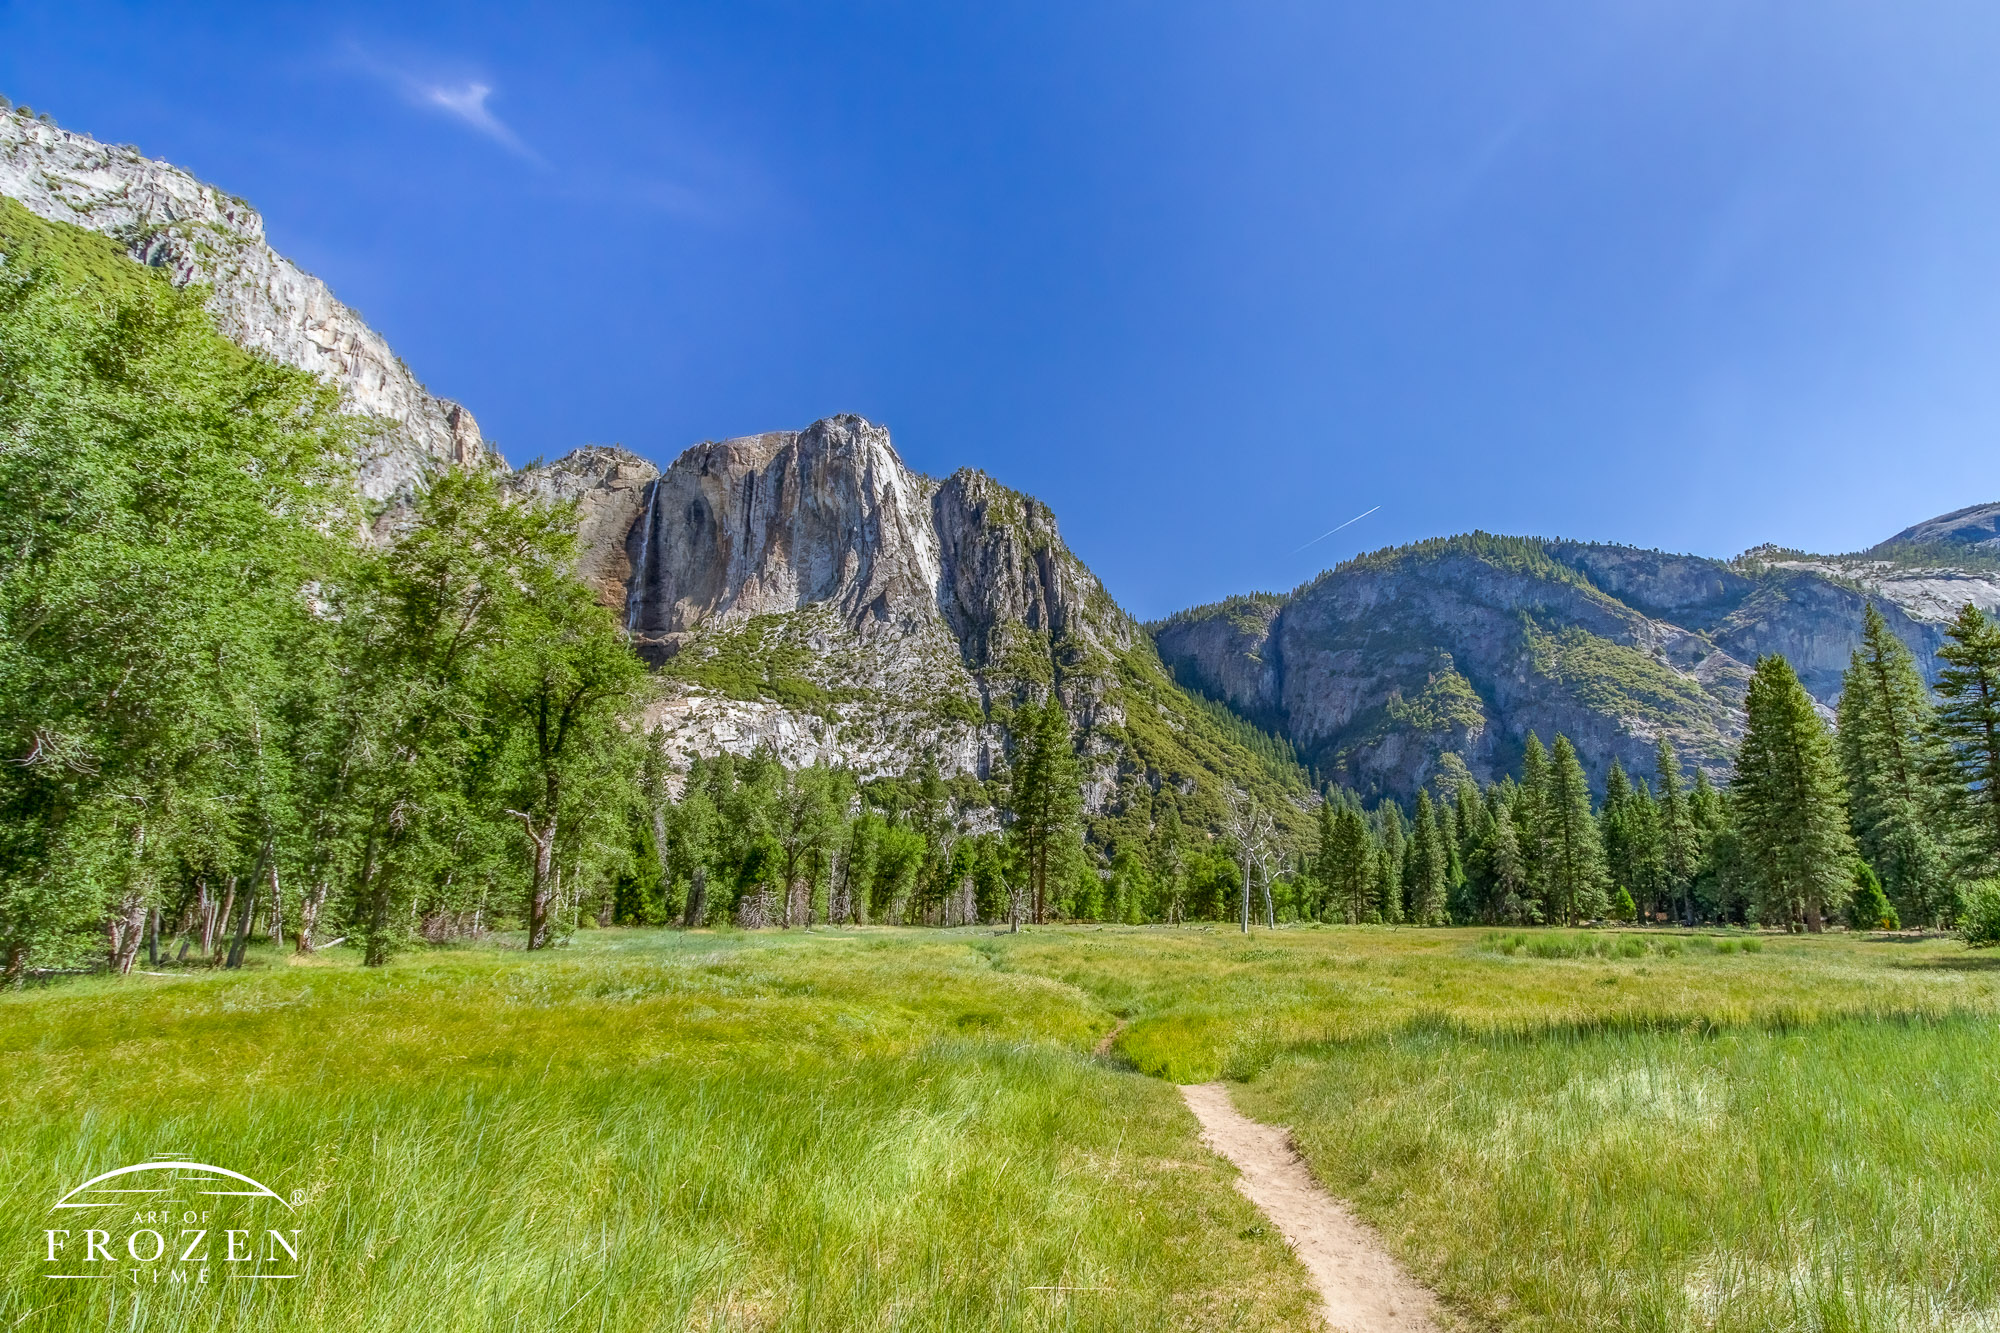 A footpath leads the eye through a grassy meadow with Yosemite Point and Falls on the distant horizon.